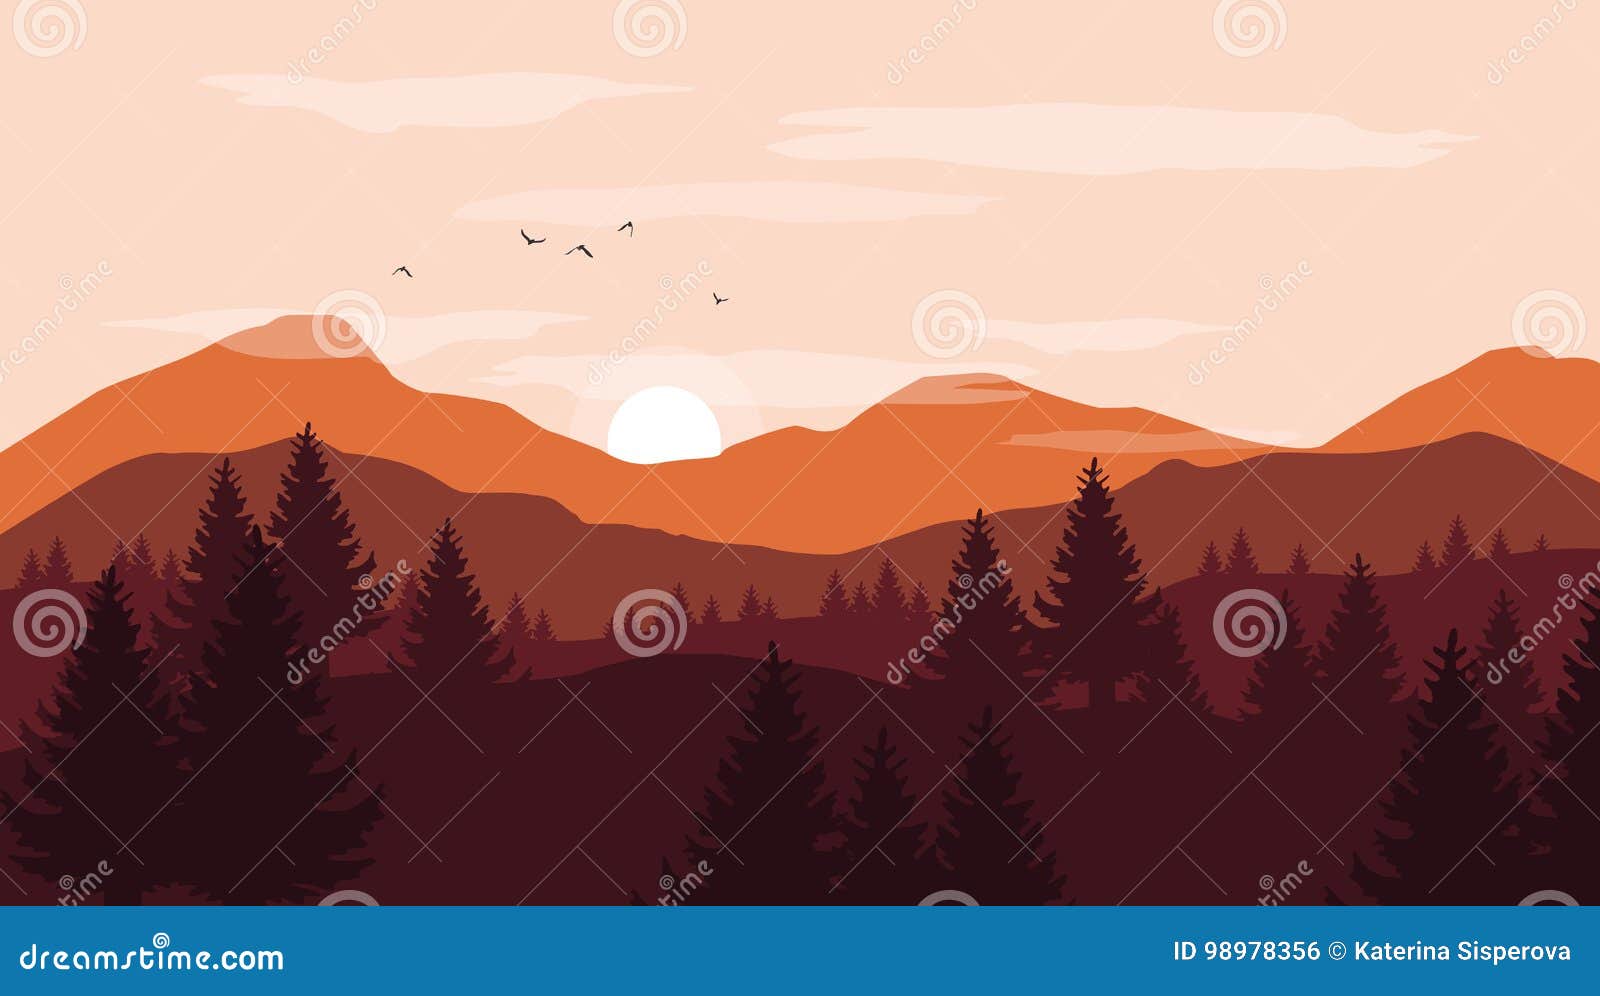 landscape with orange and red silhouettes of mountains and hills